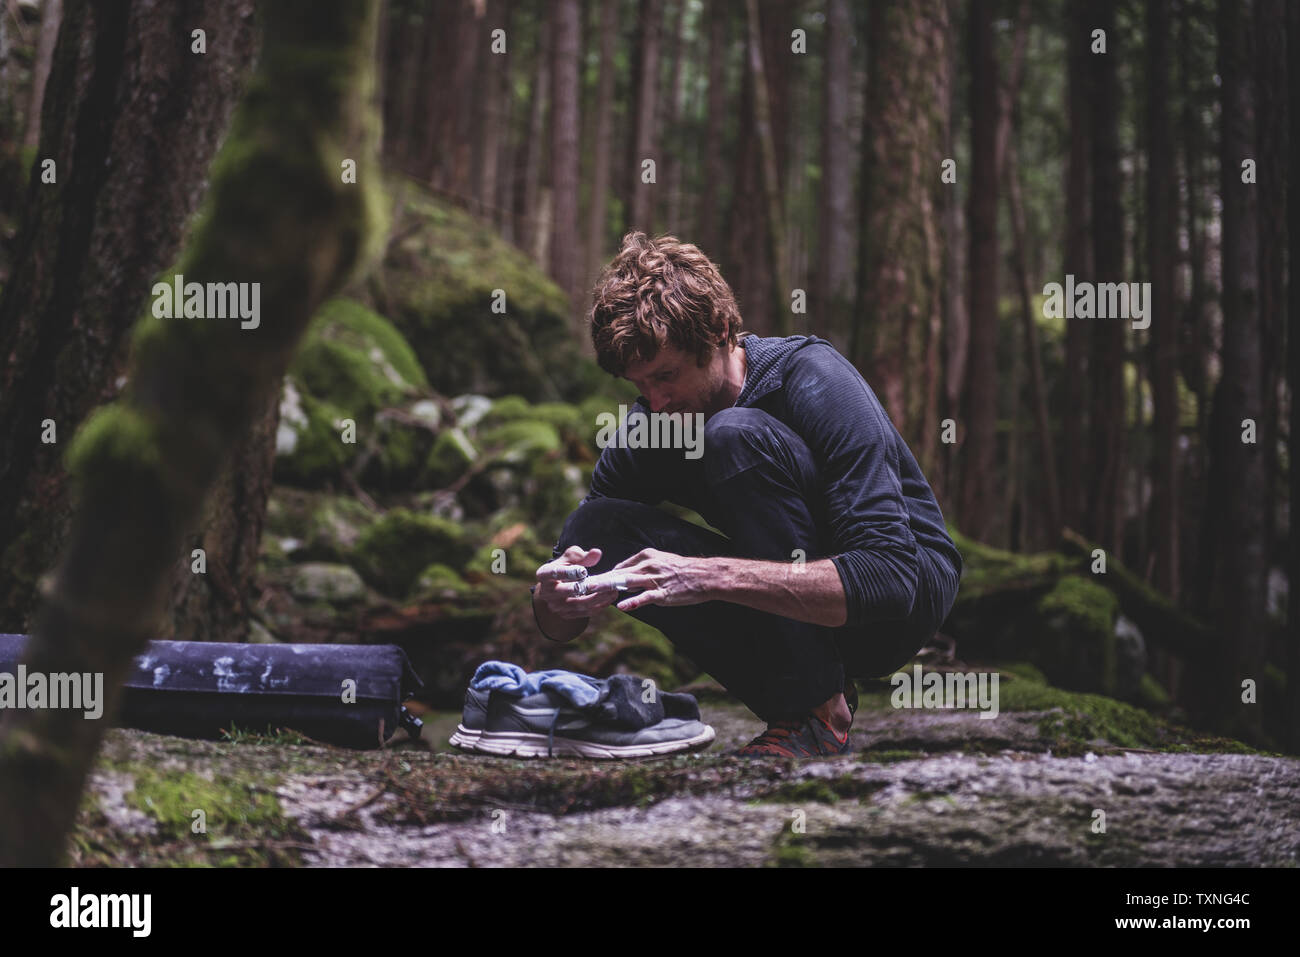 Climber taping fingers before bouldering in forest, Squamish, Canada Stock Photo